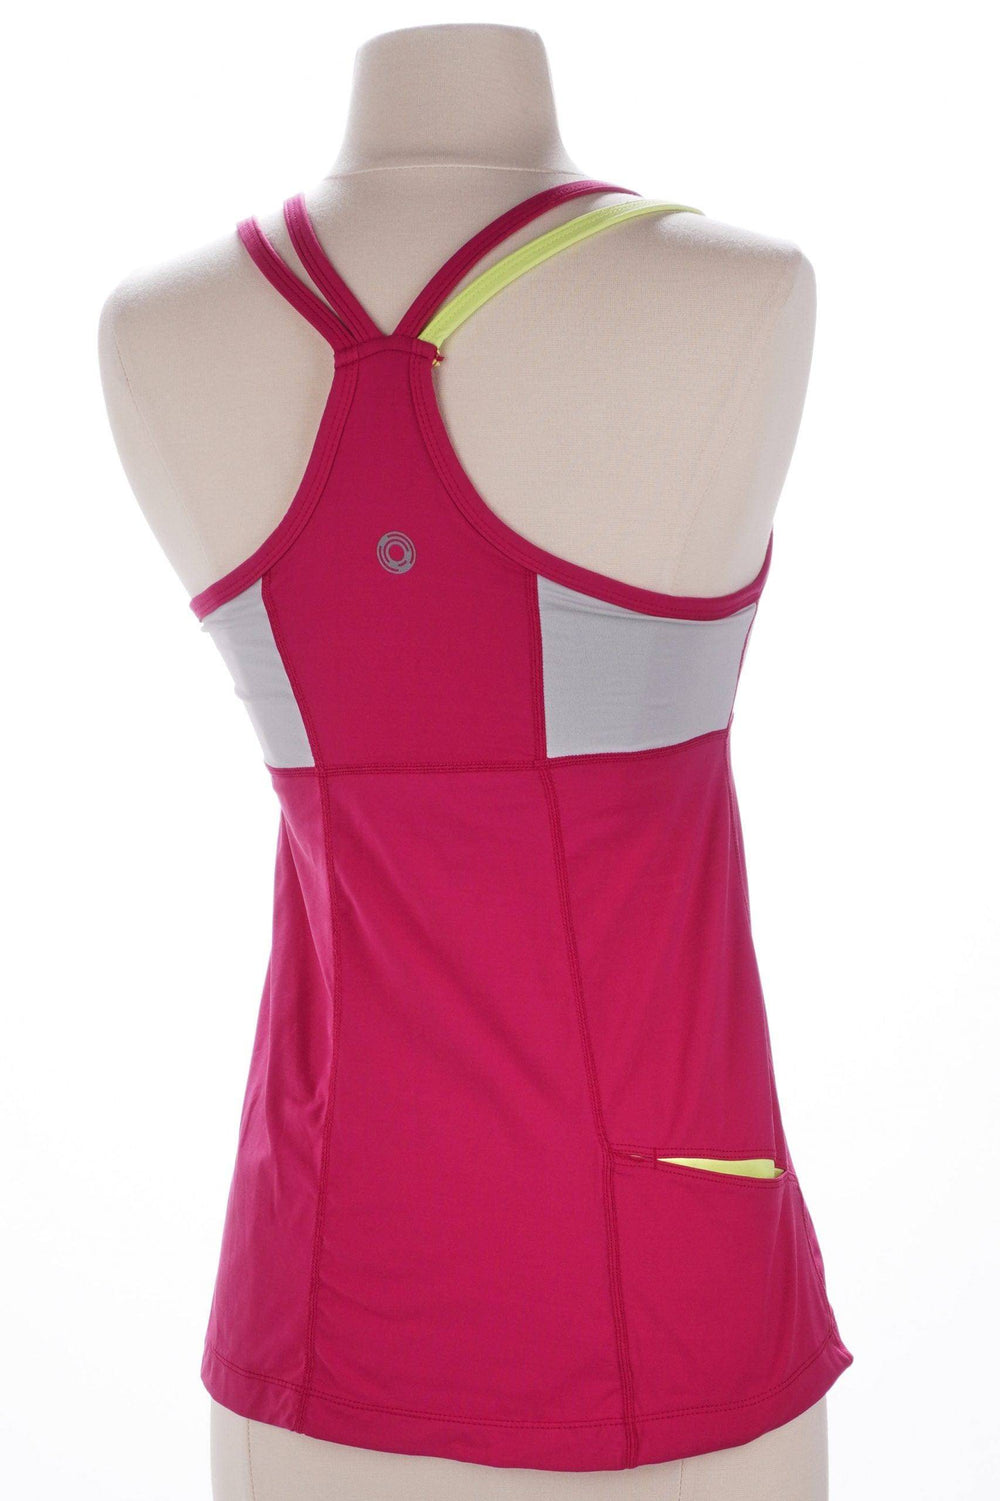 Bloq Pink / Small / Consigned Bloq Pink Tennis Tank Size S